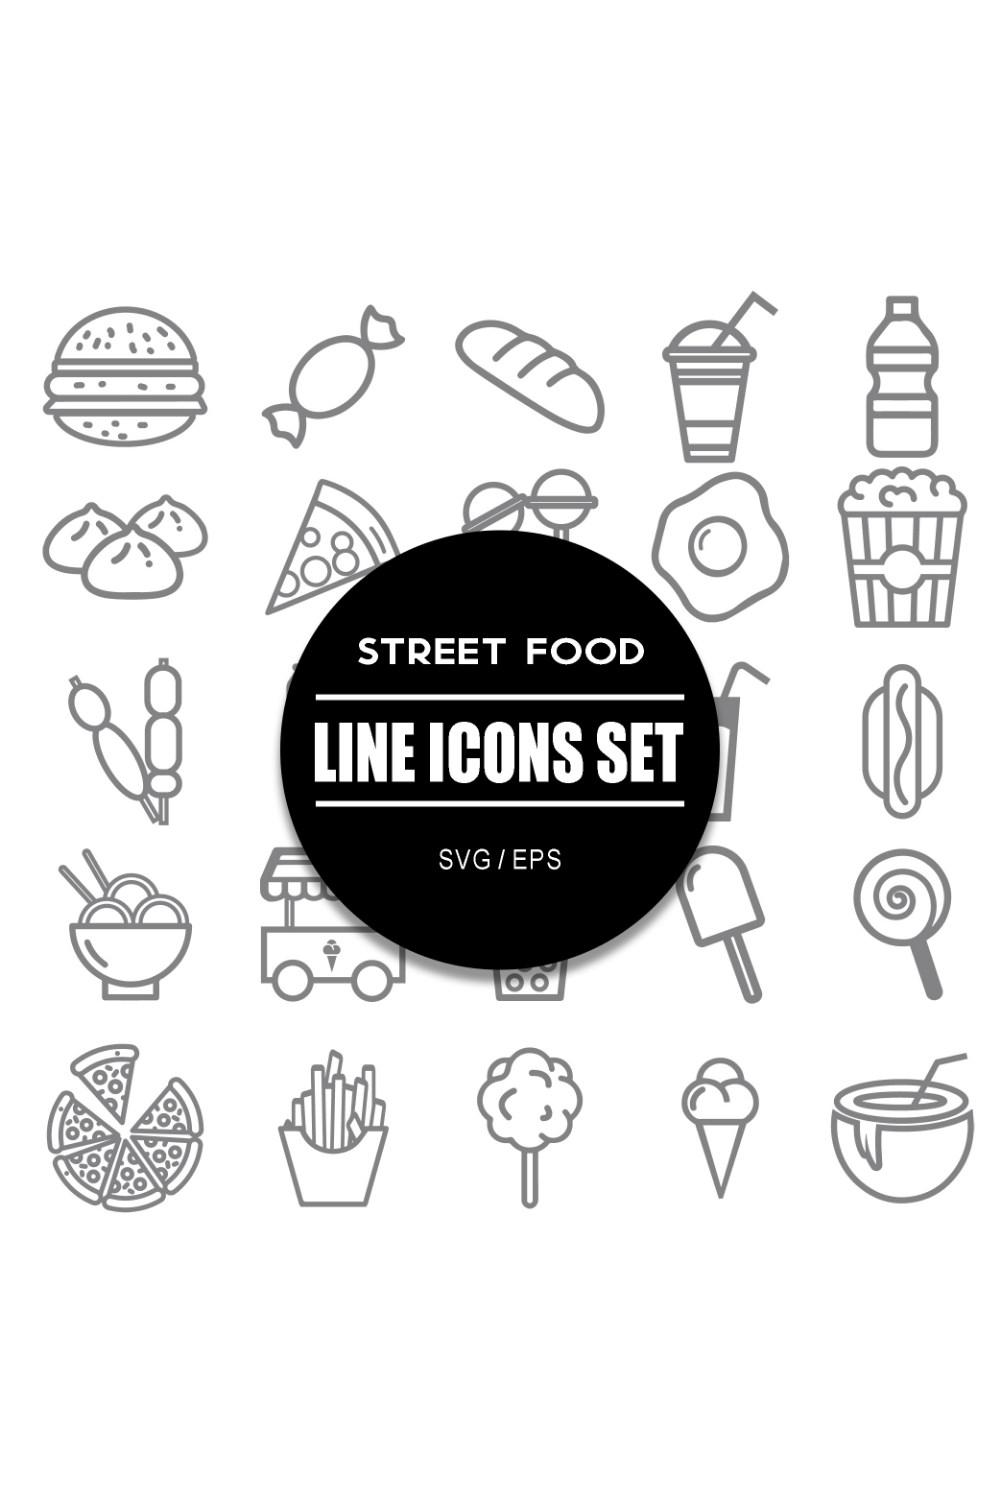 Street Food icon Set pinterest preview image.